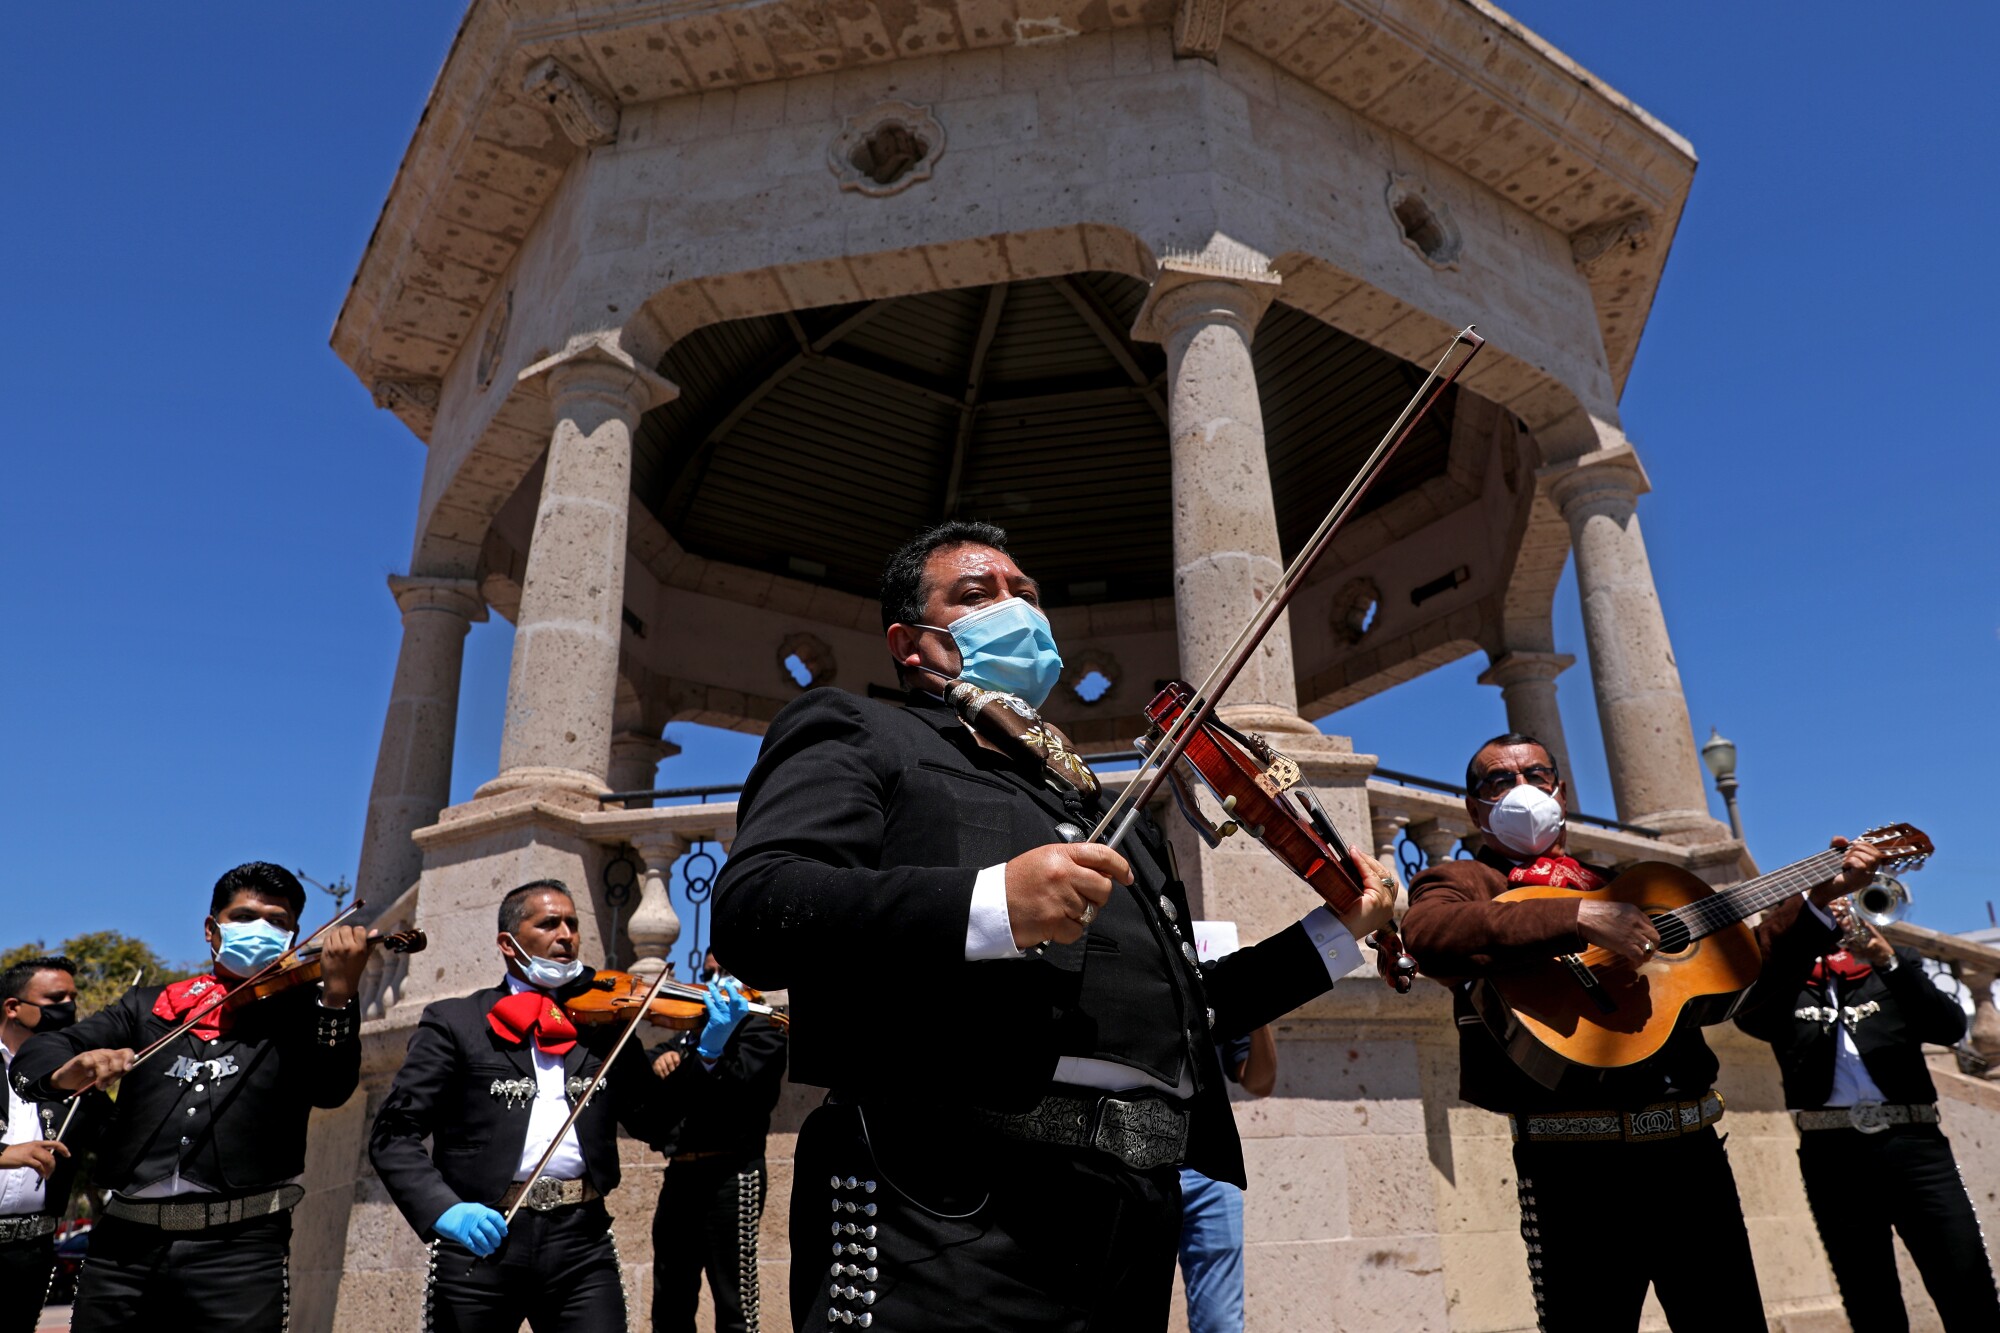 Israel Moreno, center, Jose Cervantes, right, and other musicians join in solidarity at Mariachi Plaza in Boyle Heights to ask local officials for financial help during the pandemic.